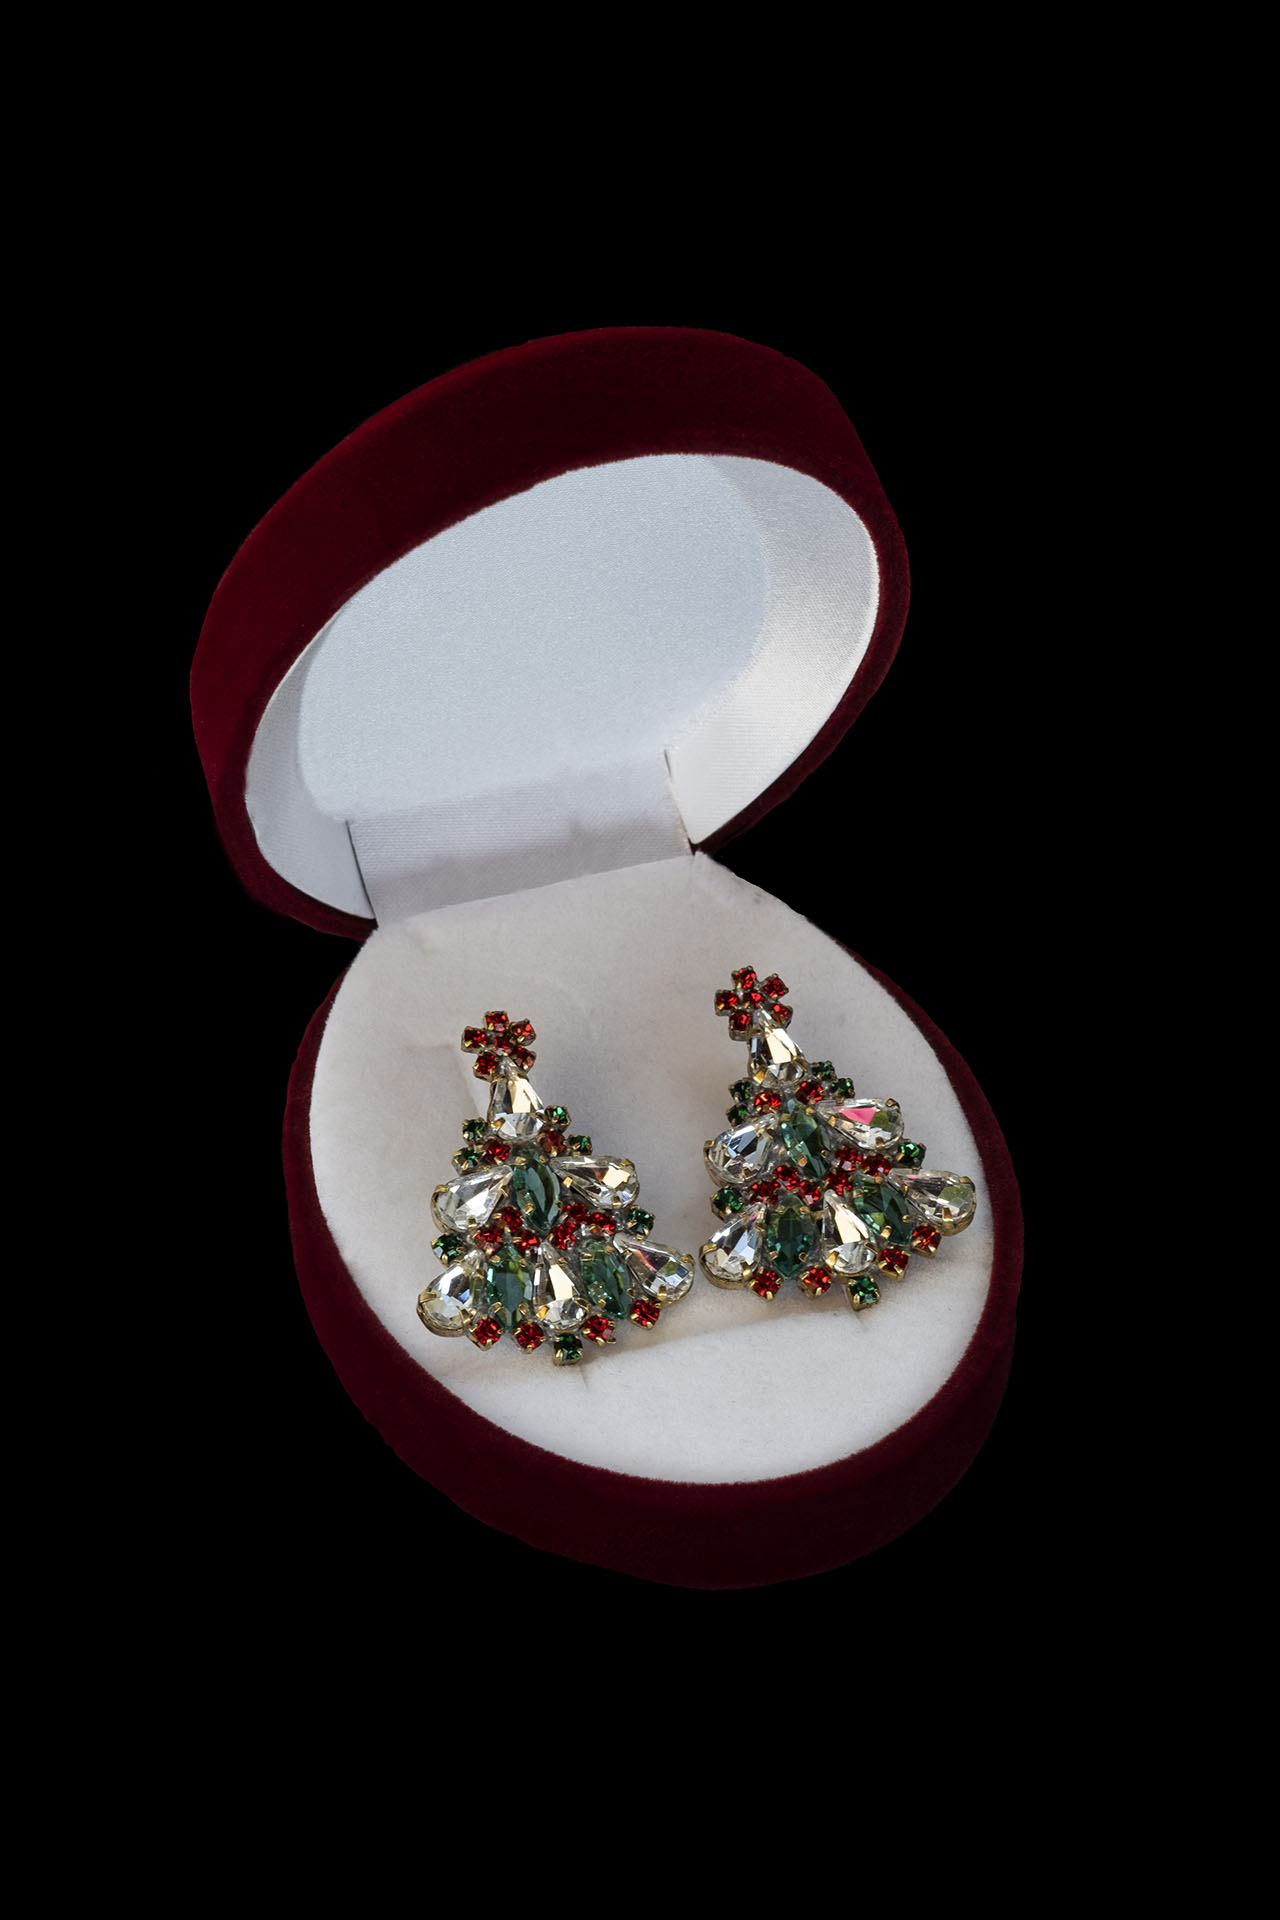 The magnificent star-topped Christmas tree stud earrings